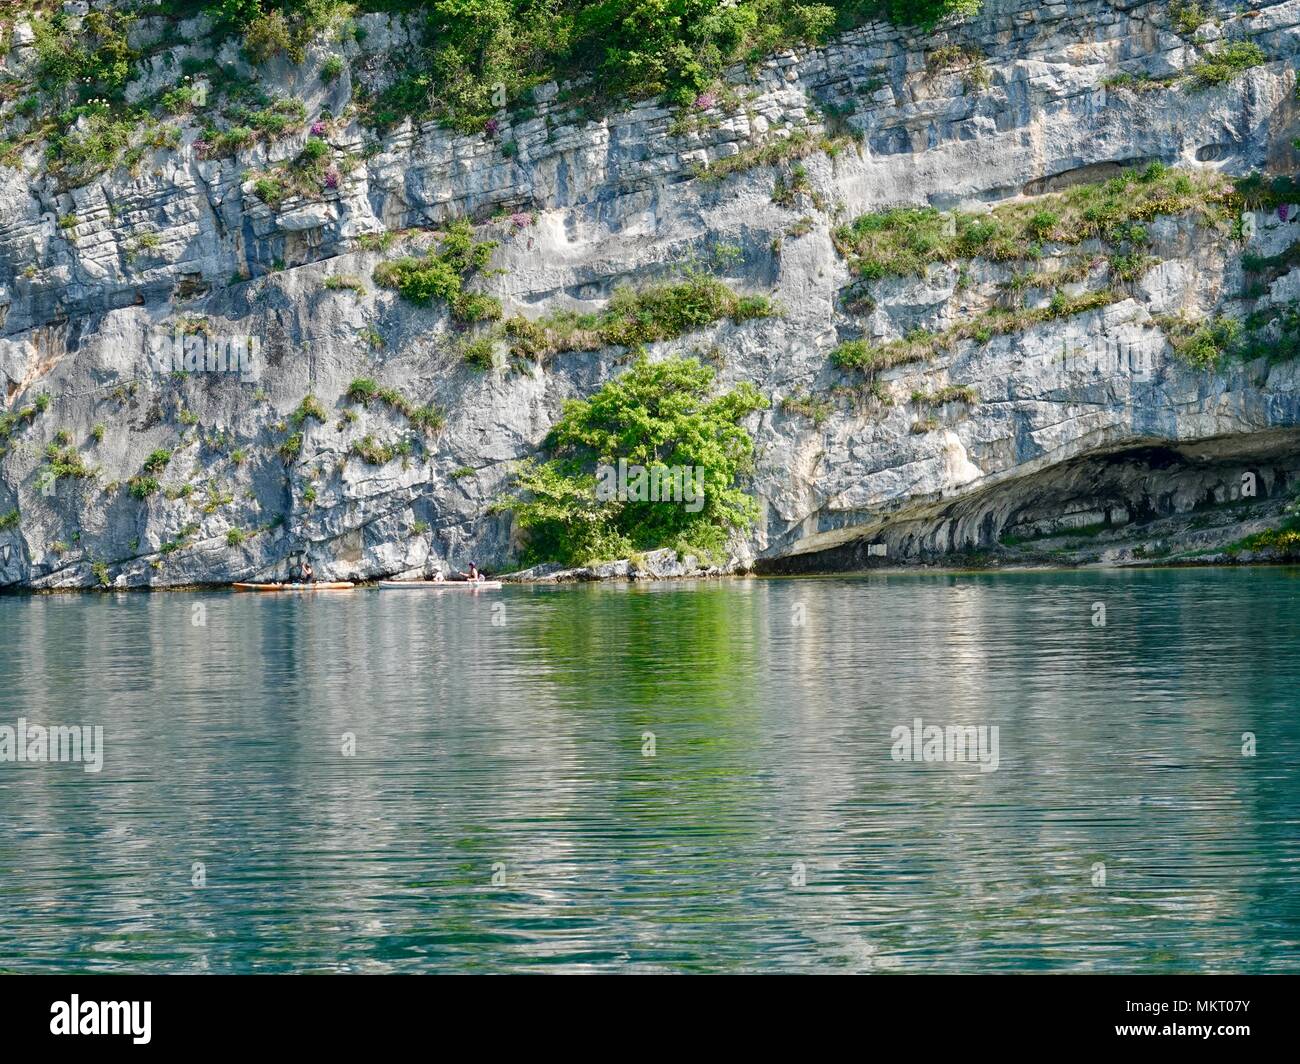 Kayakers paddling past the entrance to a recessed, cave-line area and rock striations at the edge of Lake Annecy, France Stock Photo